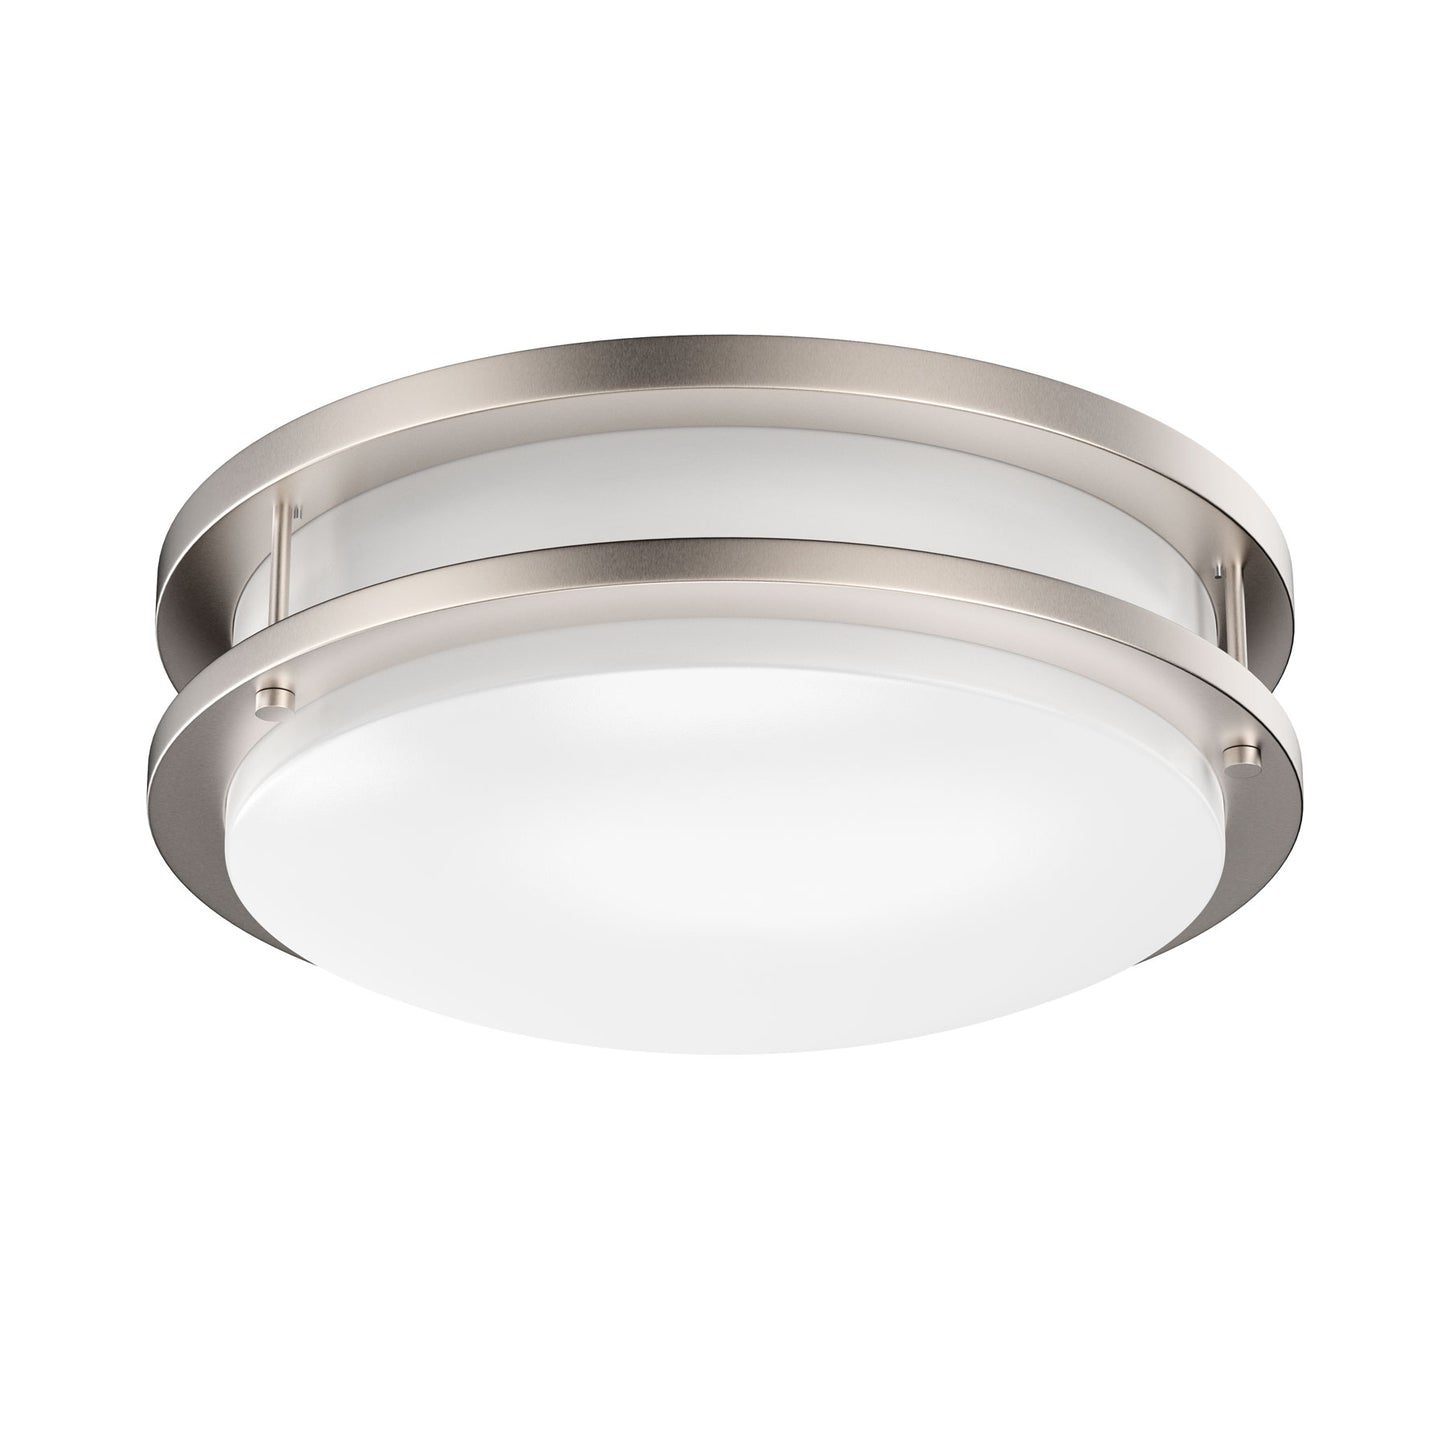 14 inch Dimmable LED Flush Mount Ceiling Lights, Double Ring, 25W,1750 Lumens, 3000K/4000K/5000K Switchable Ceiling Lights, Brushed Nickel Finish Steel, For Hallway Kitchen Stairwell, ETL Listed